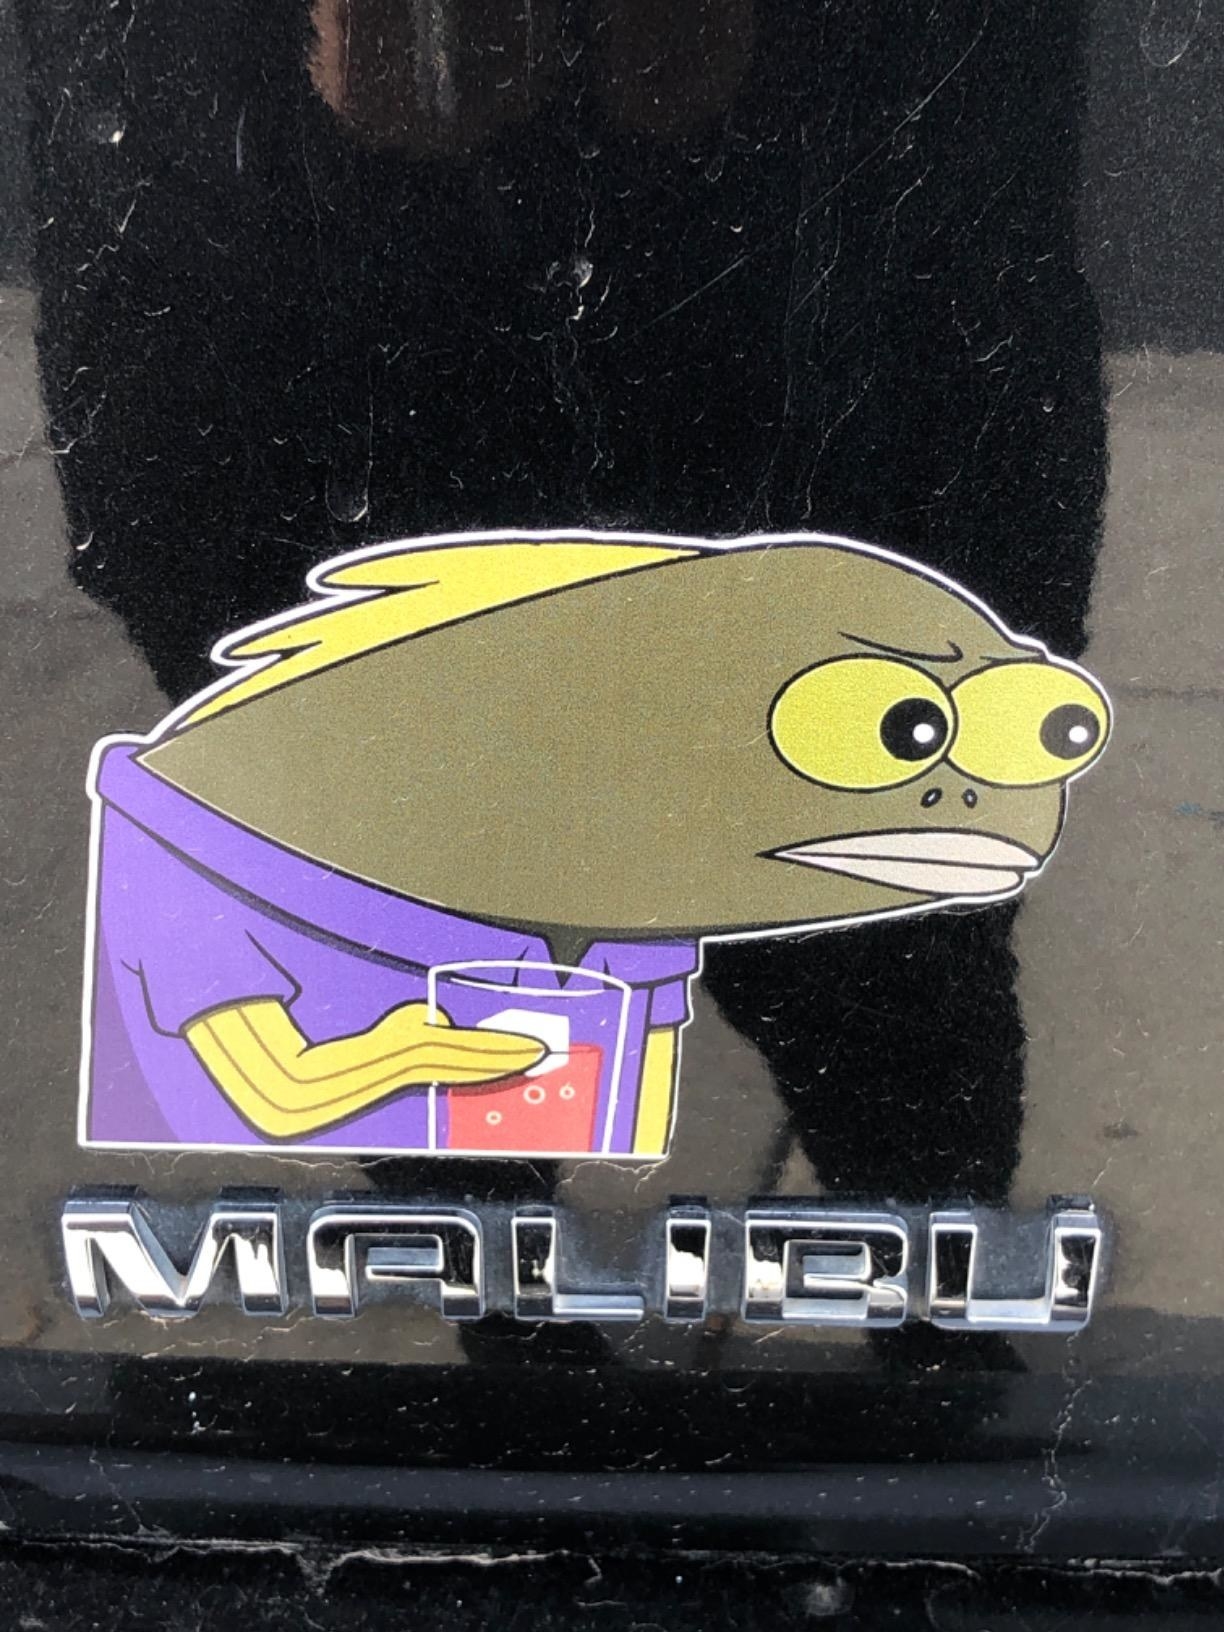 magnet that looks like the fish from spongebob that cranes out his neck and looks judgemental 